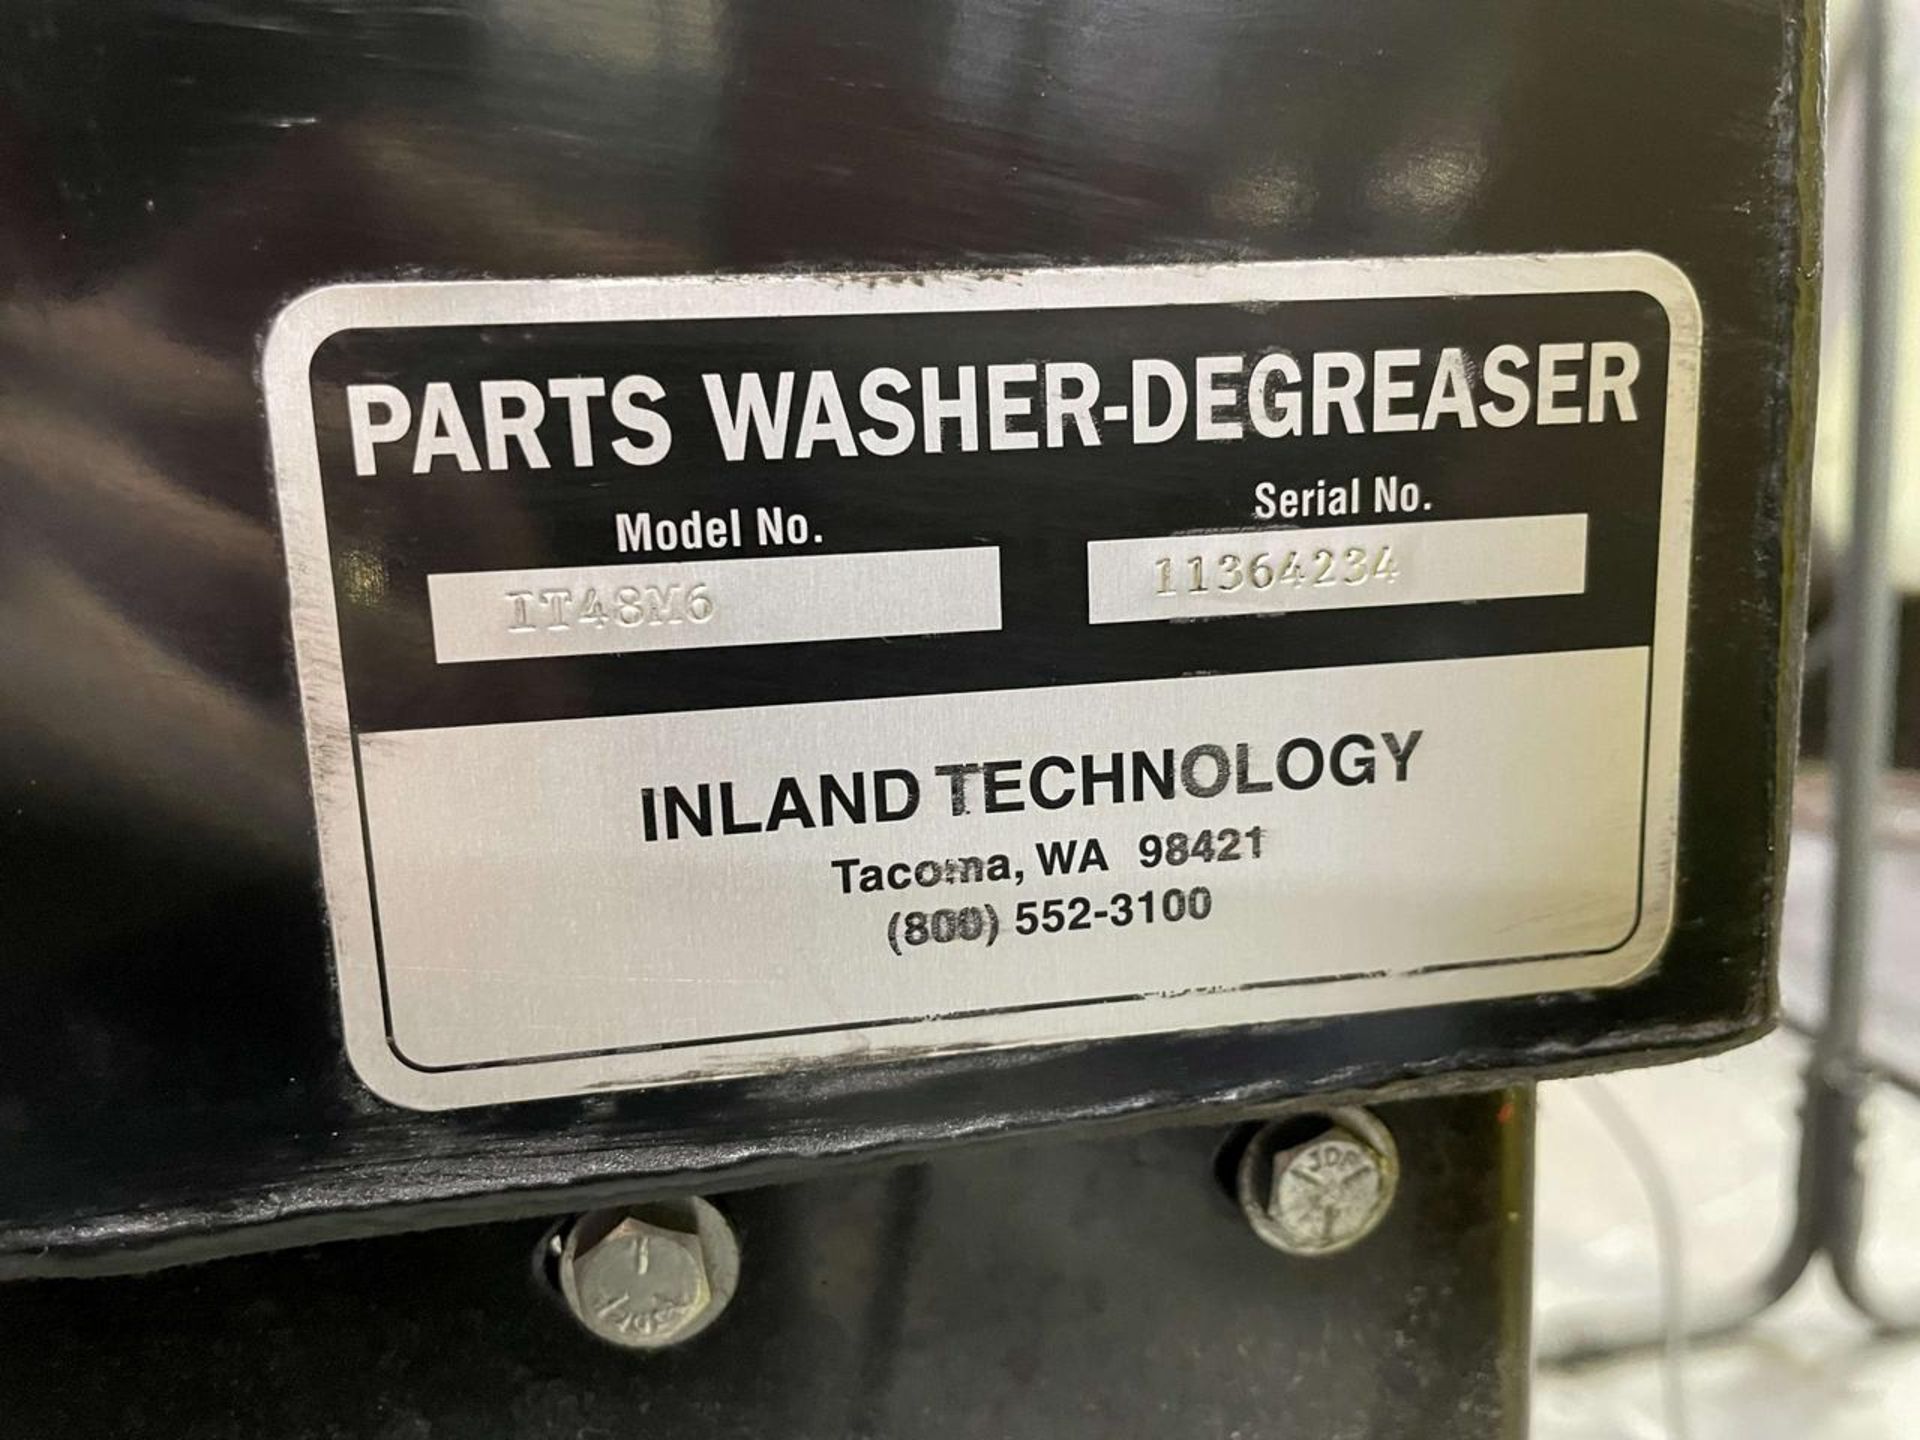 Inland Technology Model IT48M6 Parts Washer-Degreaser - Image 4 of 4